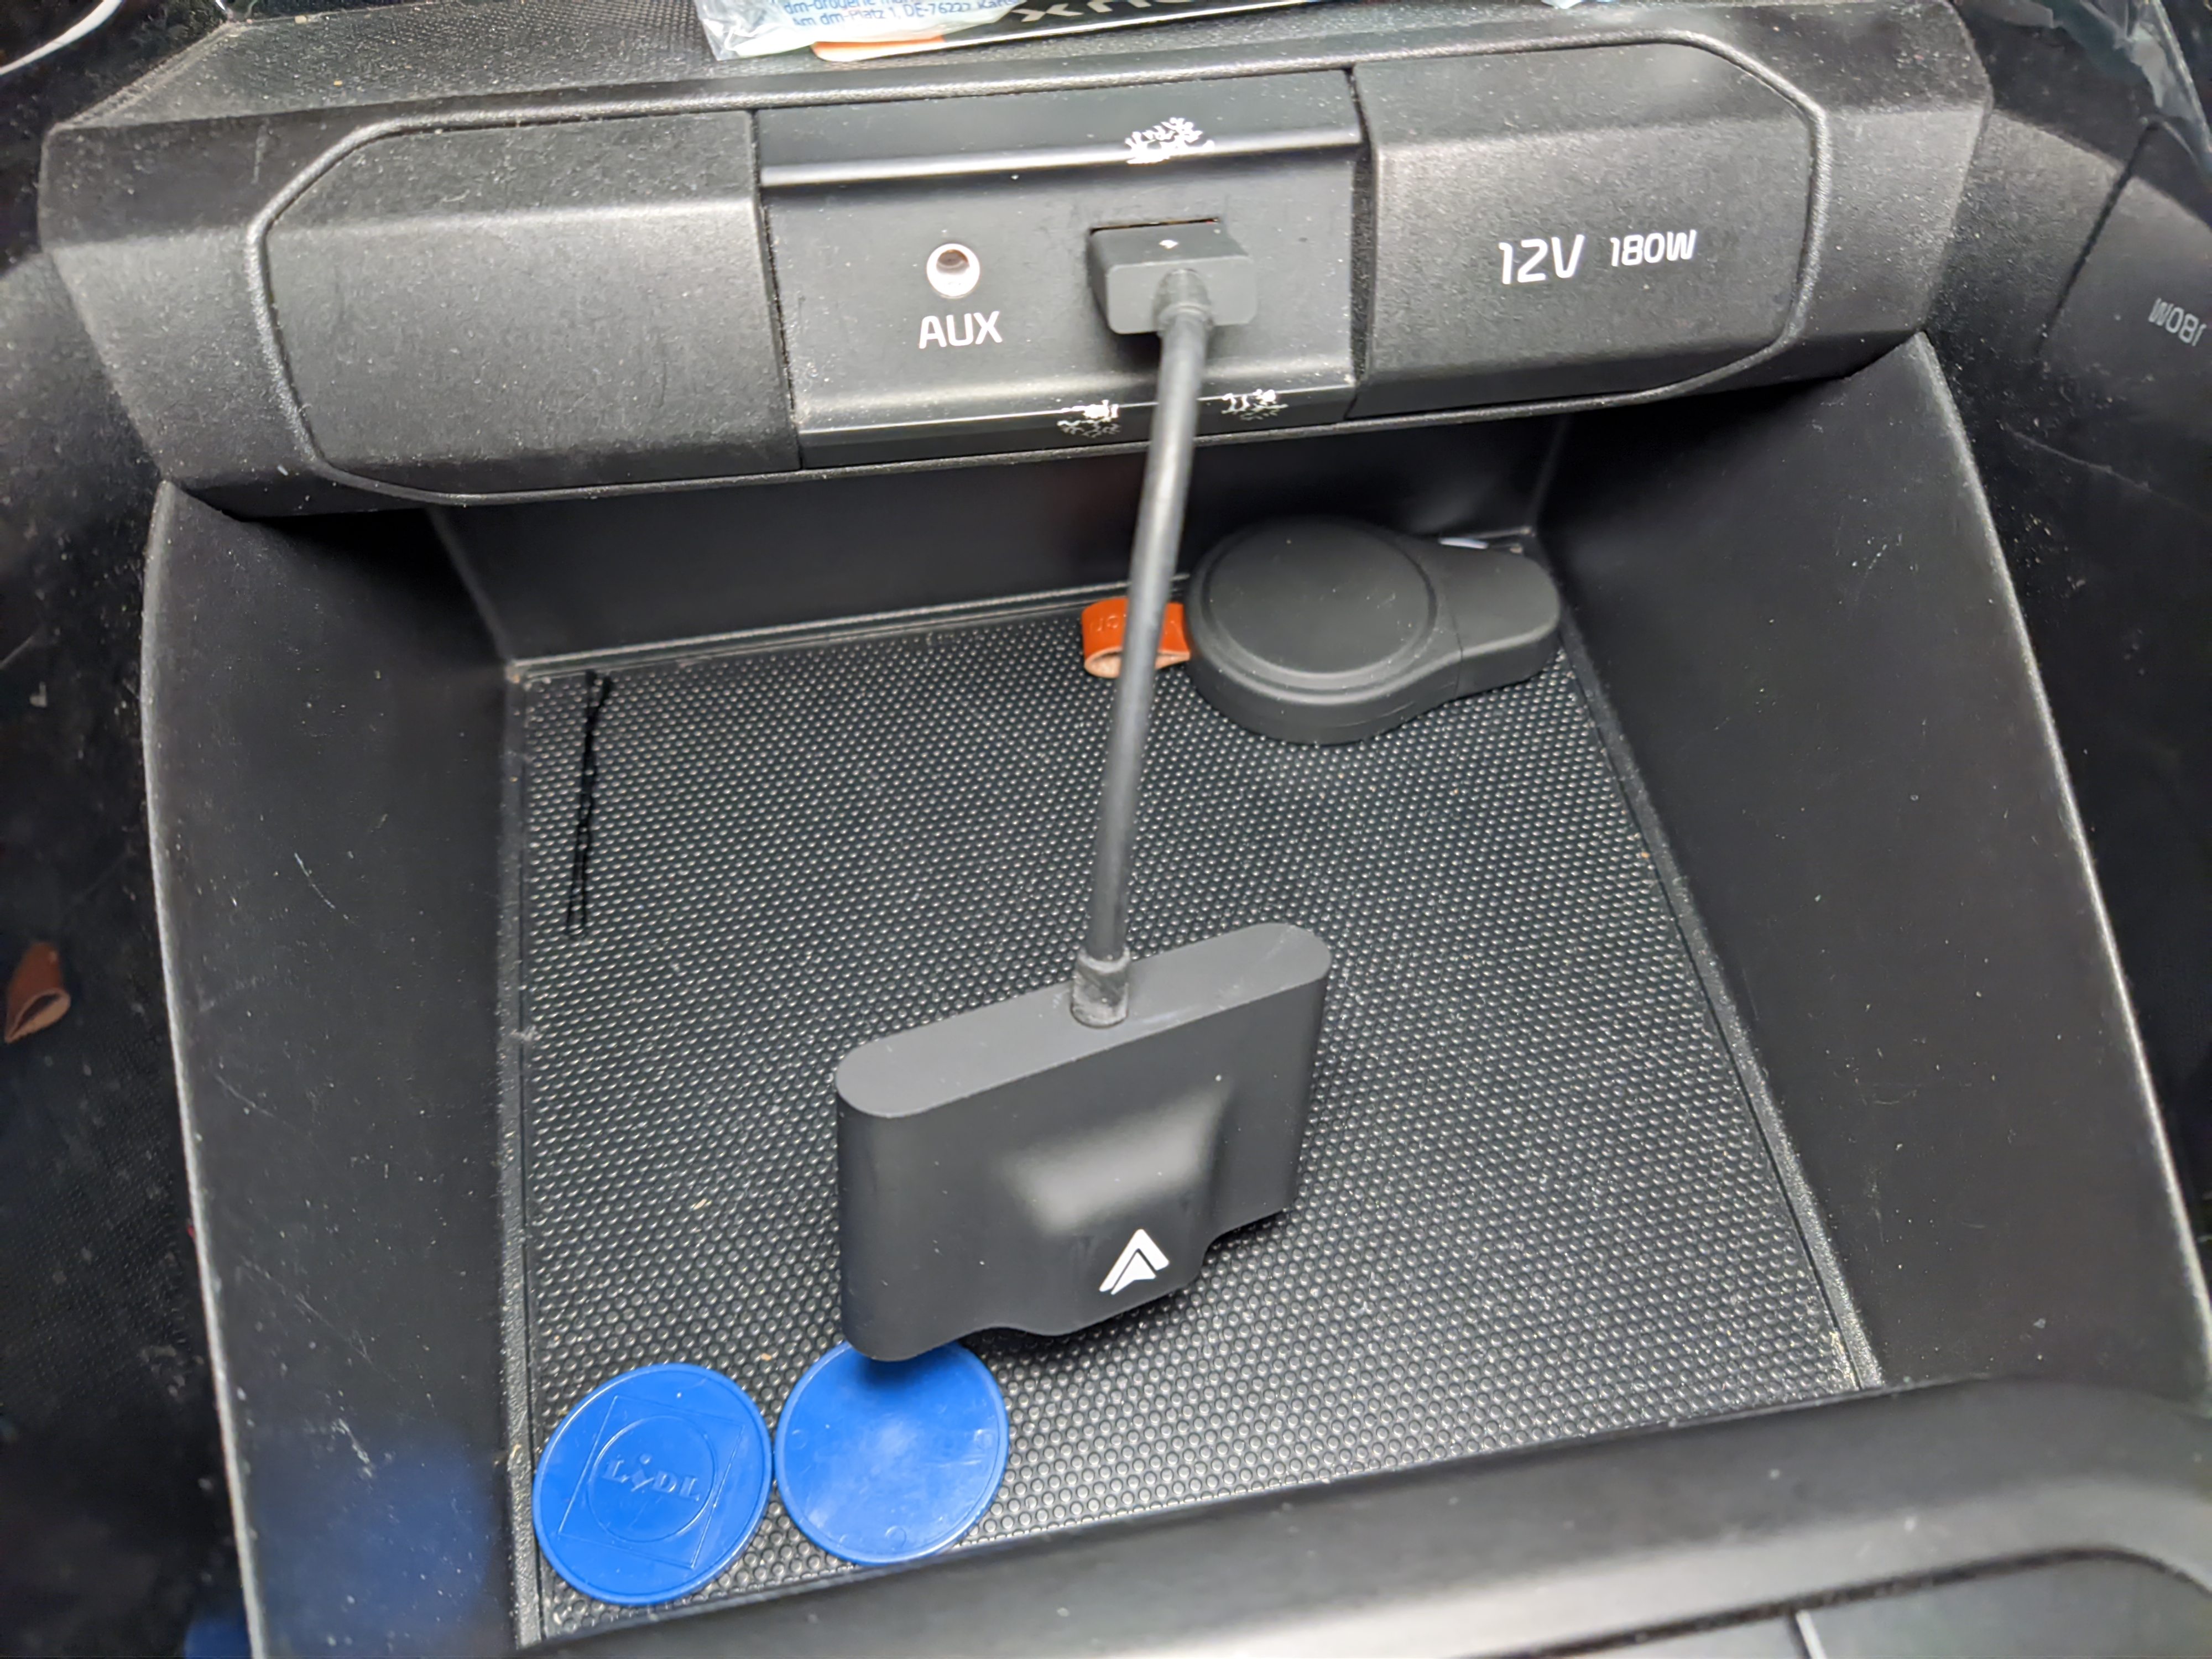 Adapter plugged into car